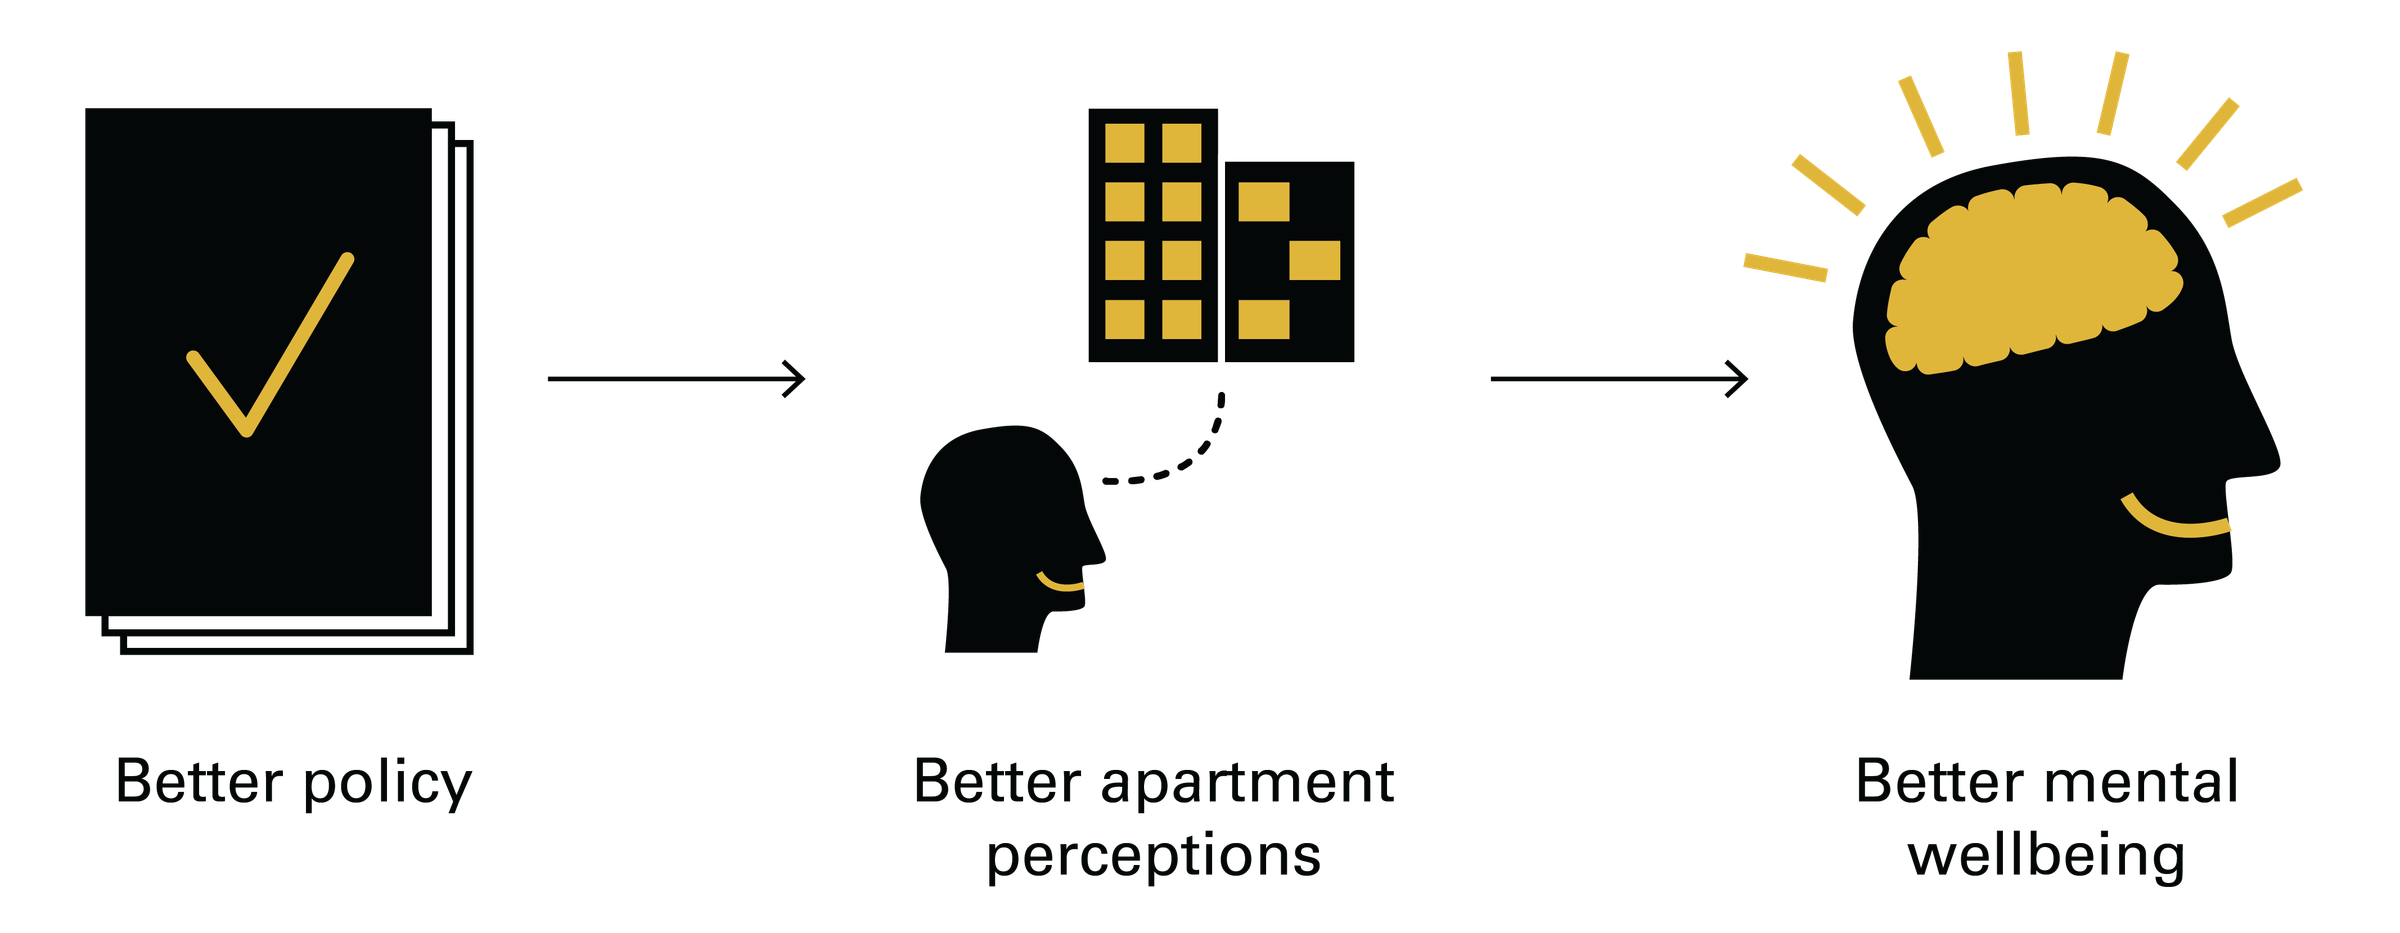 A diagram showing that better policy leads to better perception of apartments and higher wellbeing.